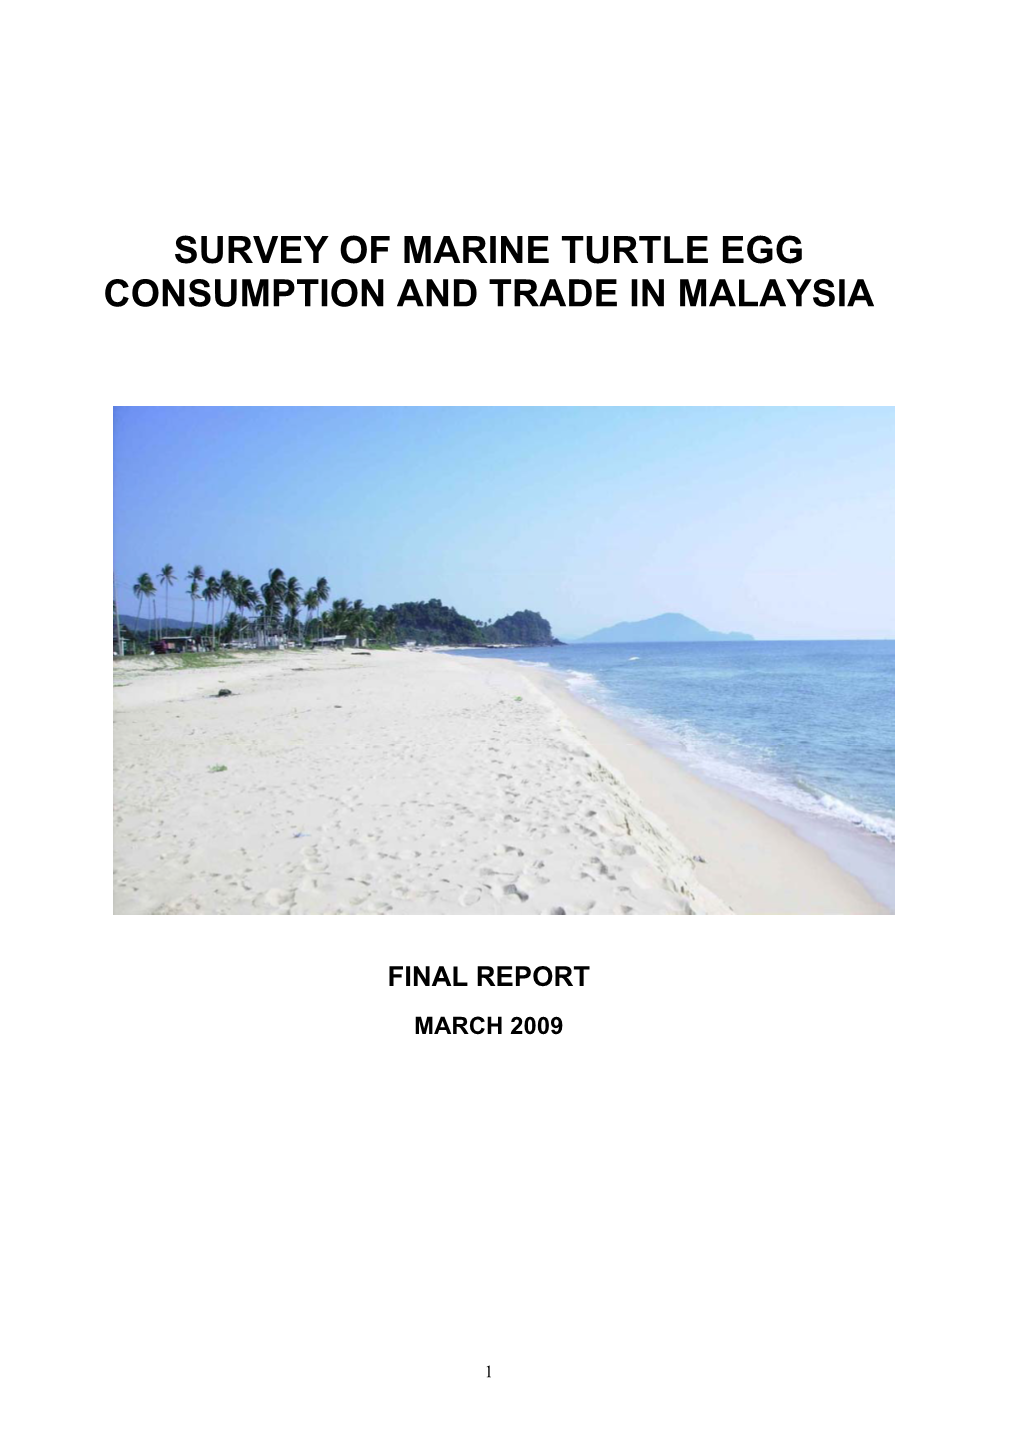 Survey of Marine Turtle Egg Consumption and Trade in Malaysia